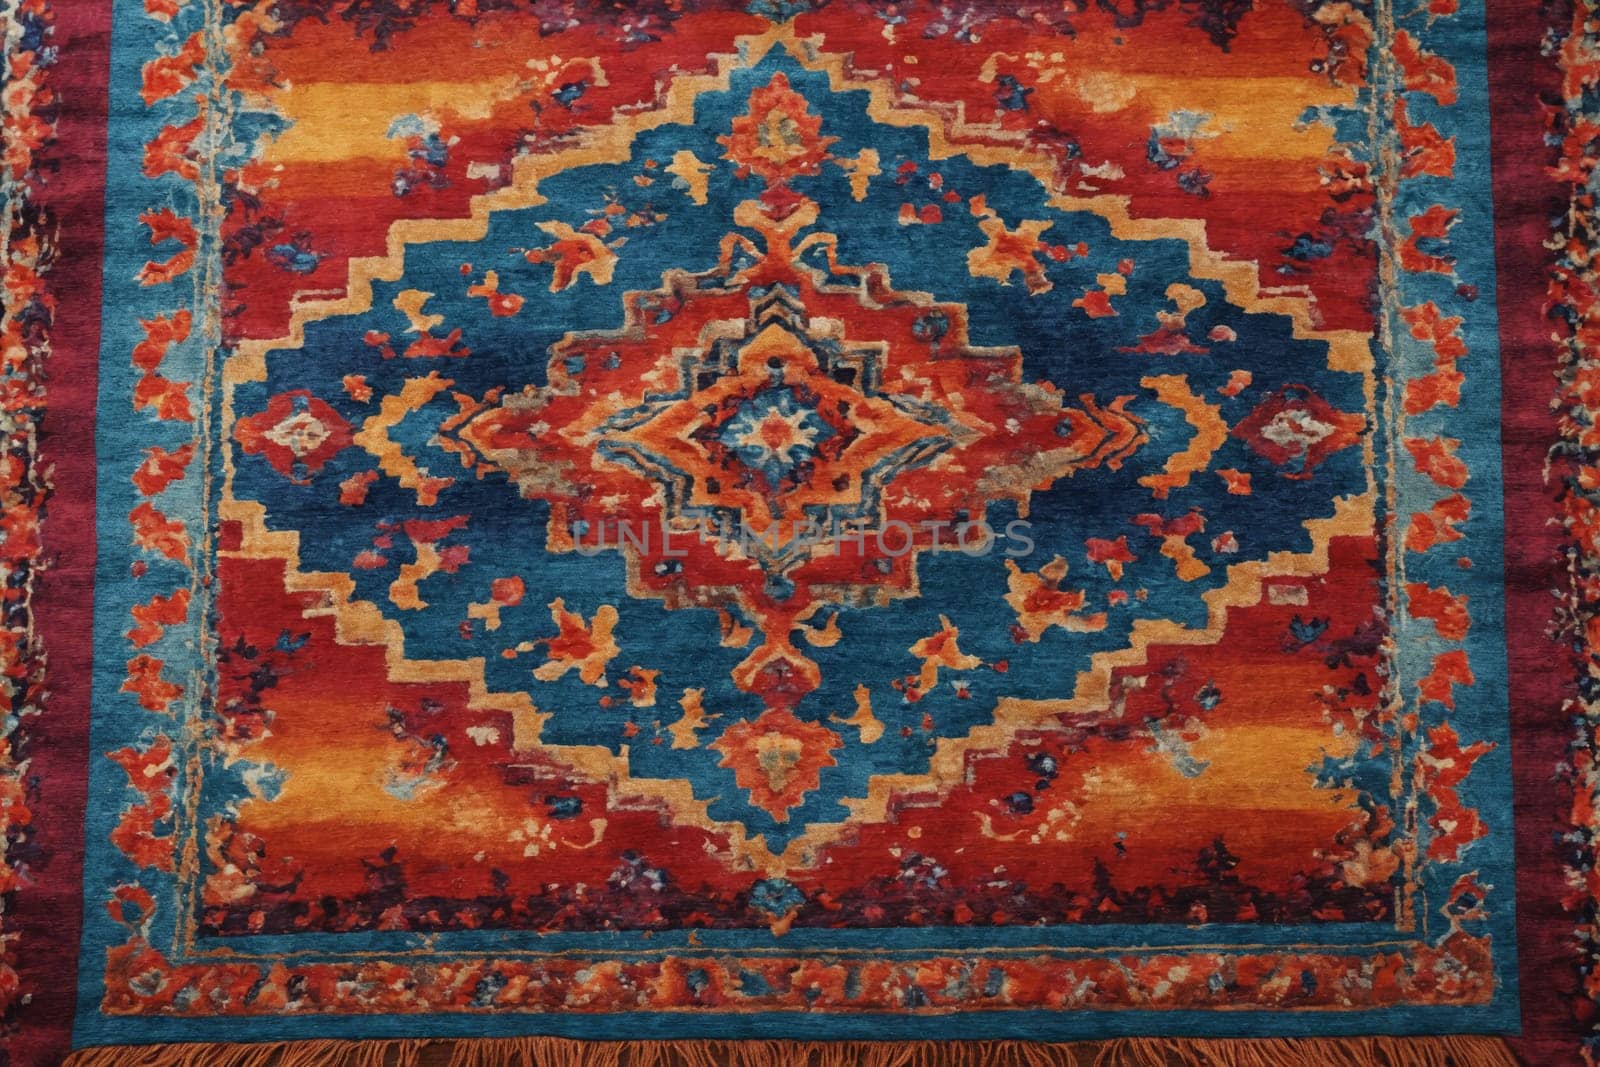 This carpet's woven pattern showcases craftsmanship in every thread and color.